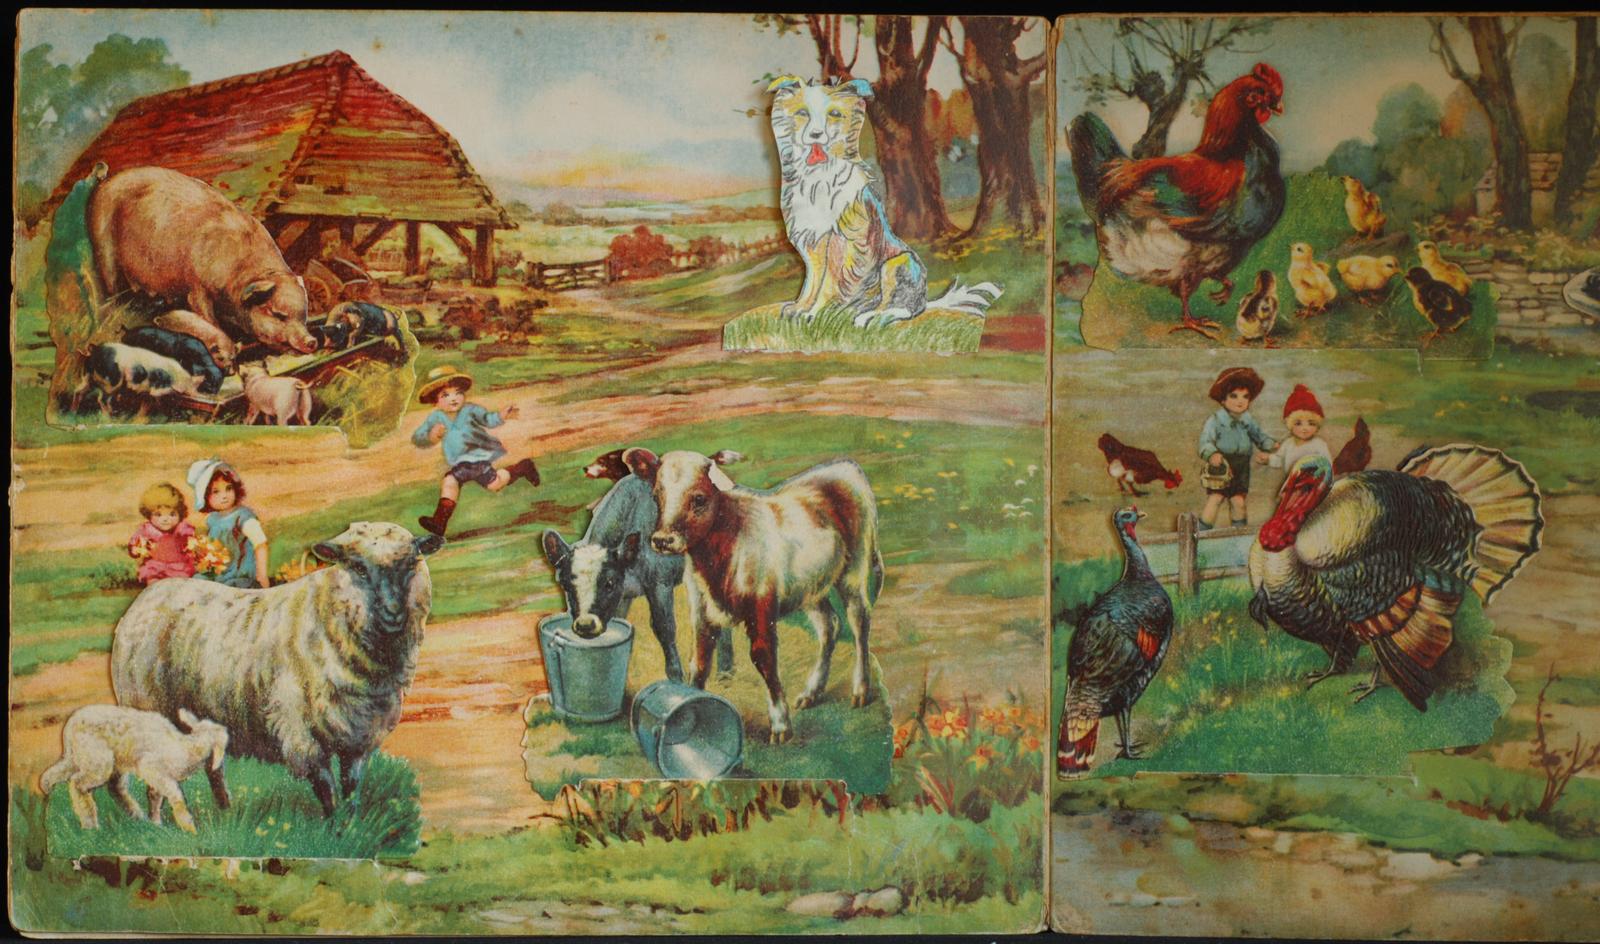 mbb001314c_-_Unnamed_-_Father_Tuck_s_Meadowsweet_Farm.Panorama_With_Movable_Pictures_-_Contains_Illustrations.jpg